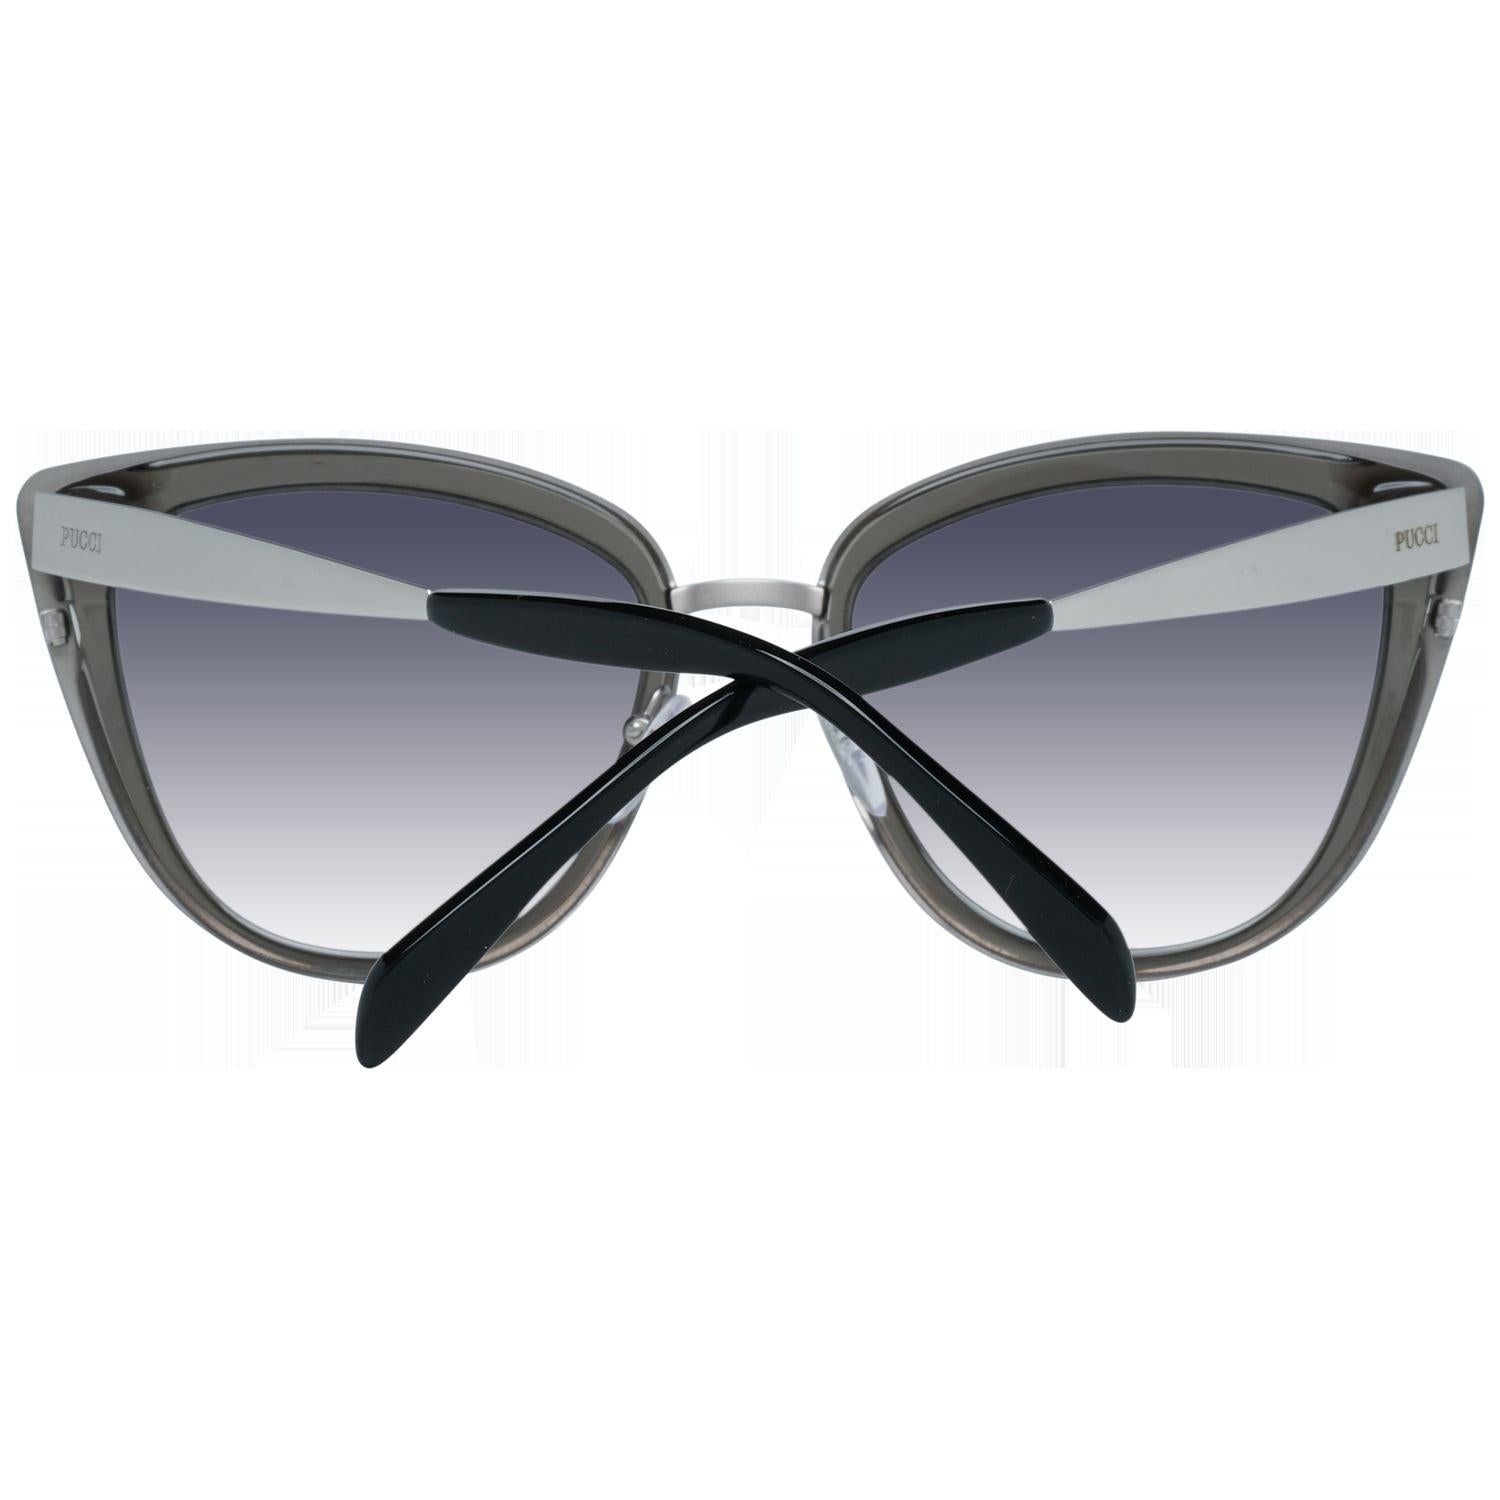 Emilio Pucci Cat Eye Silver Sunglasses EP0092 20B 55/19 145 mm In Excellent Condition For Sale In Rome, Rome